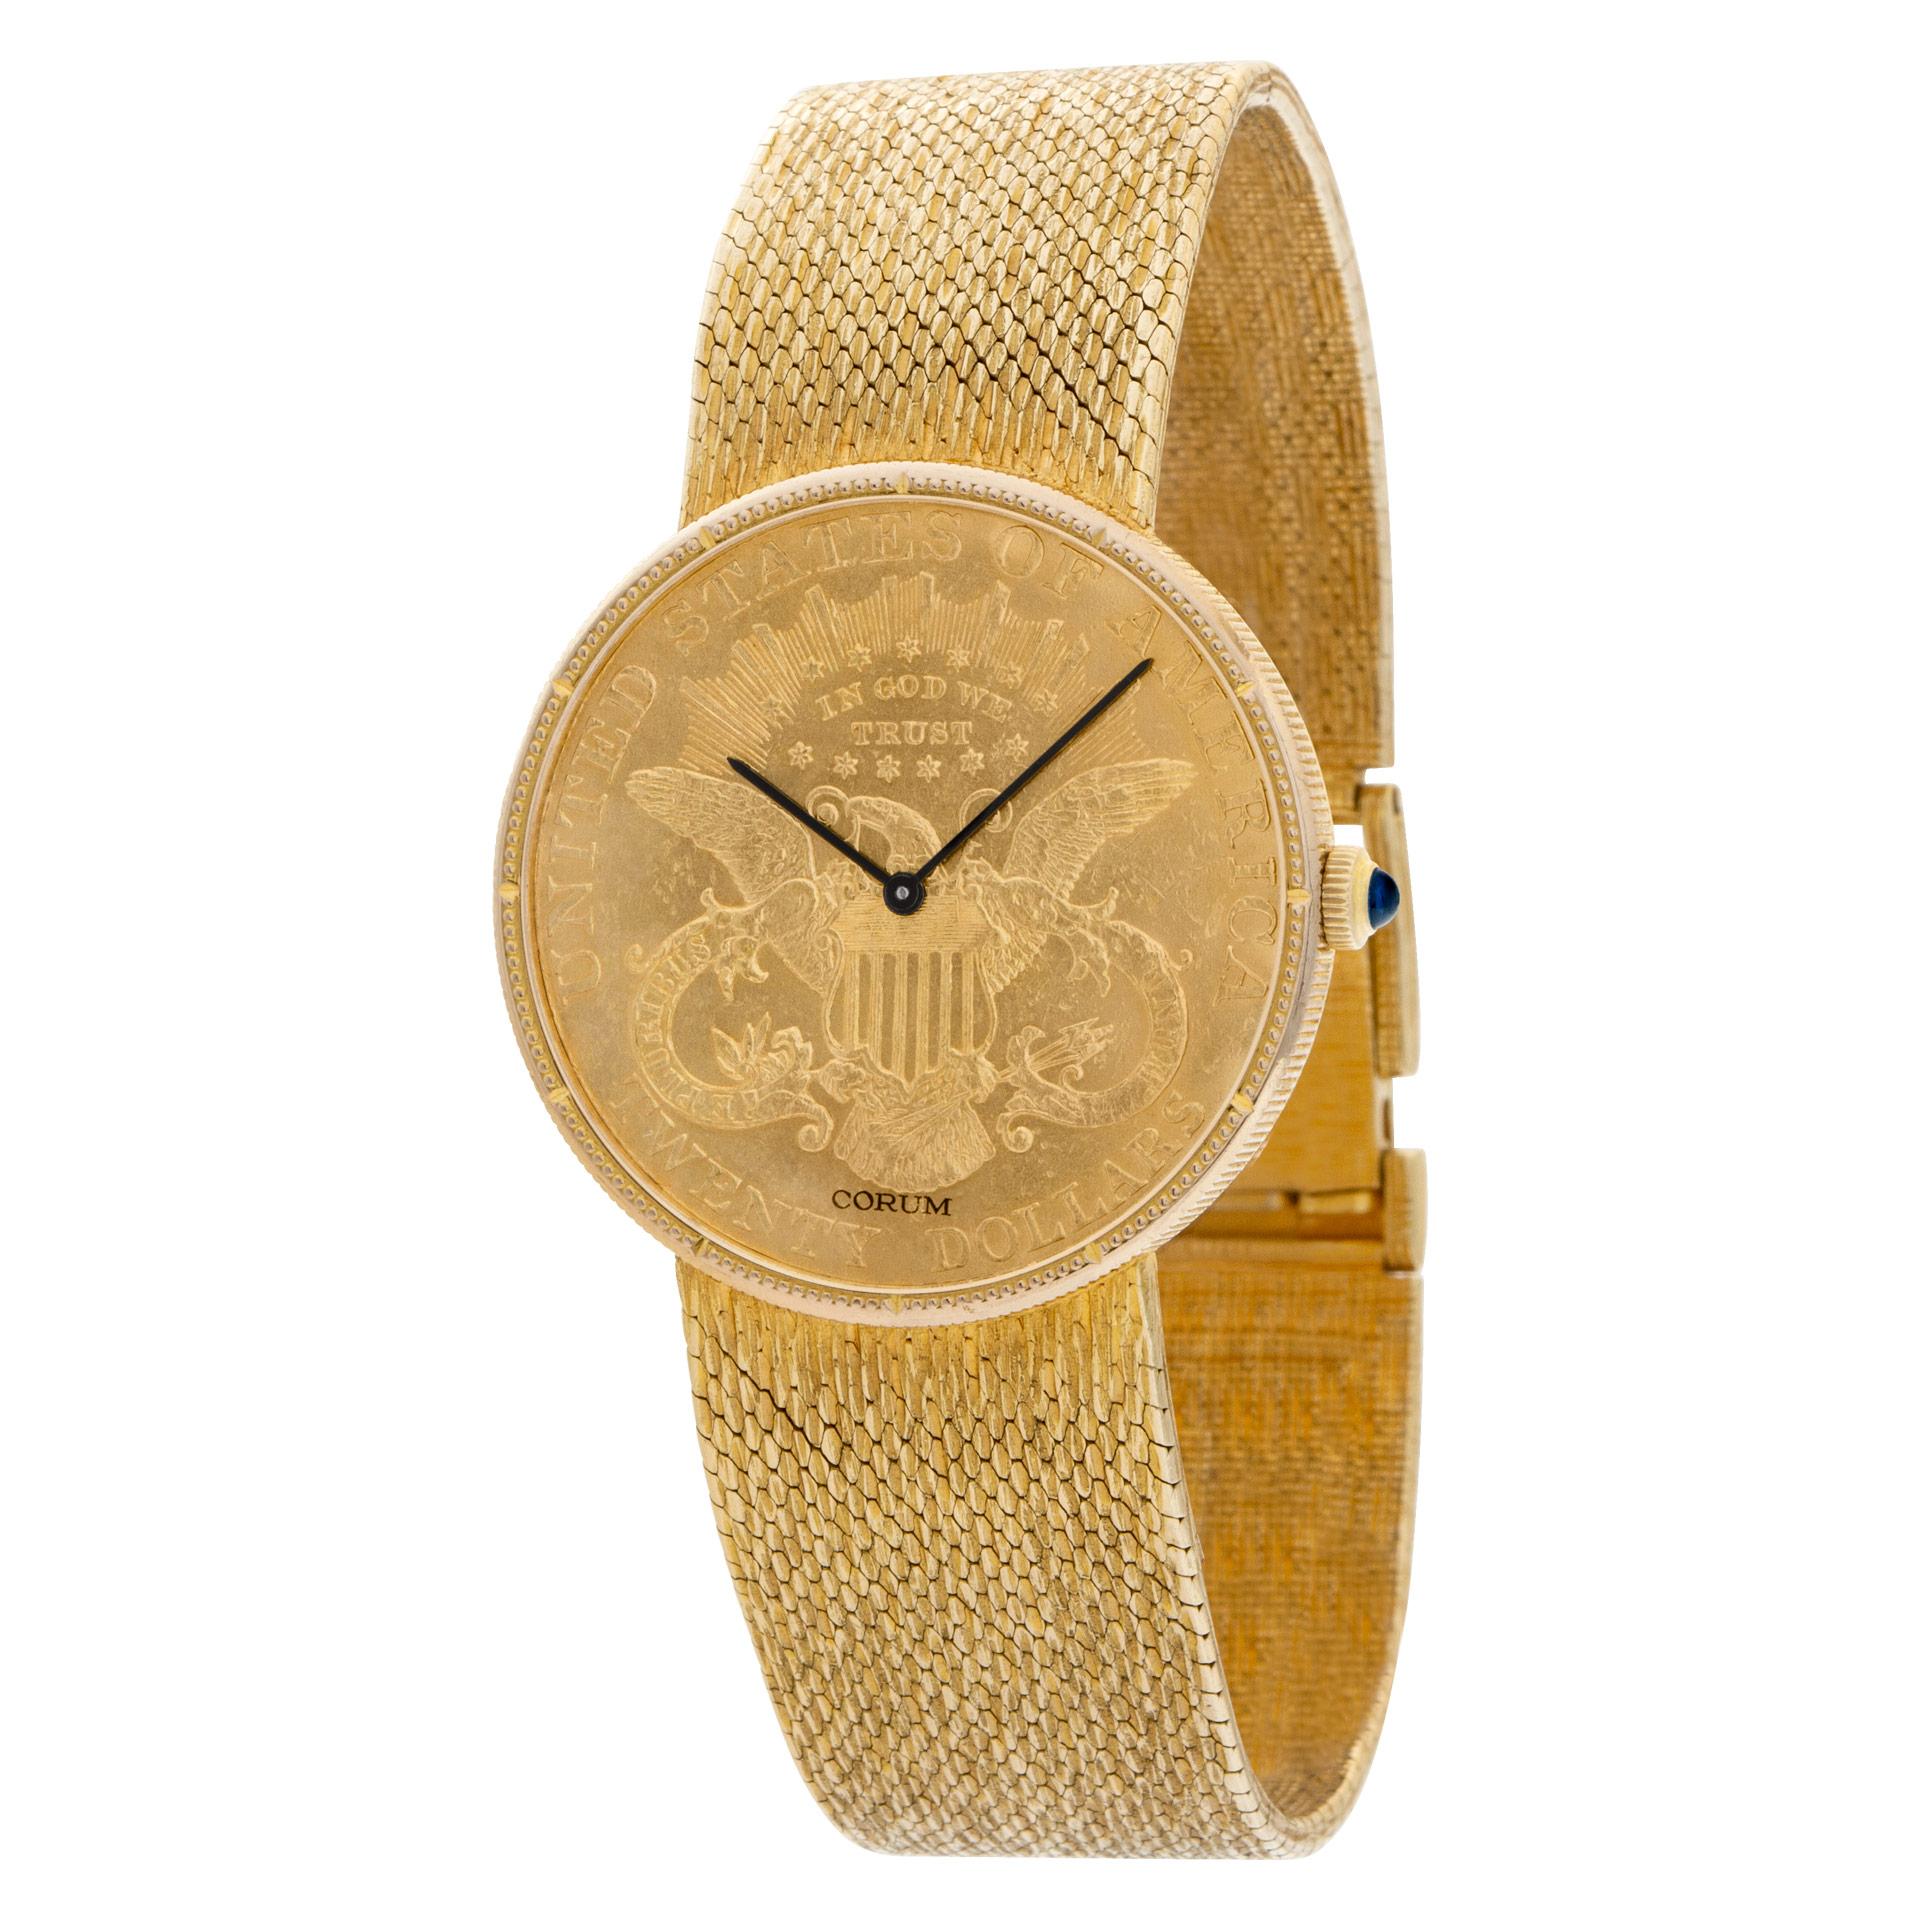 Corum $20 gold coin in 18k yellow gold with 7.5'' mesh 18k bracelet. Quartz. 35 mm case size. Ref 8890. Circa 1980s. Fine Pre-owned Corum Watch.  Certified preowned Classic Corum $20 Coin 8890 watch is made out of yellow gold on a 18k bracelet with